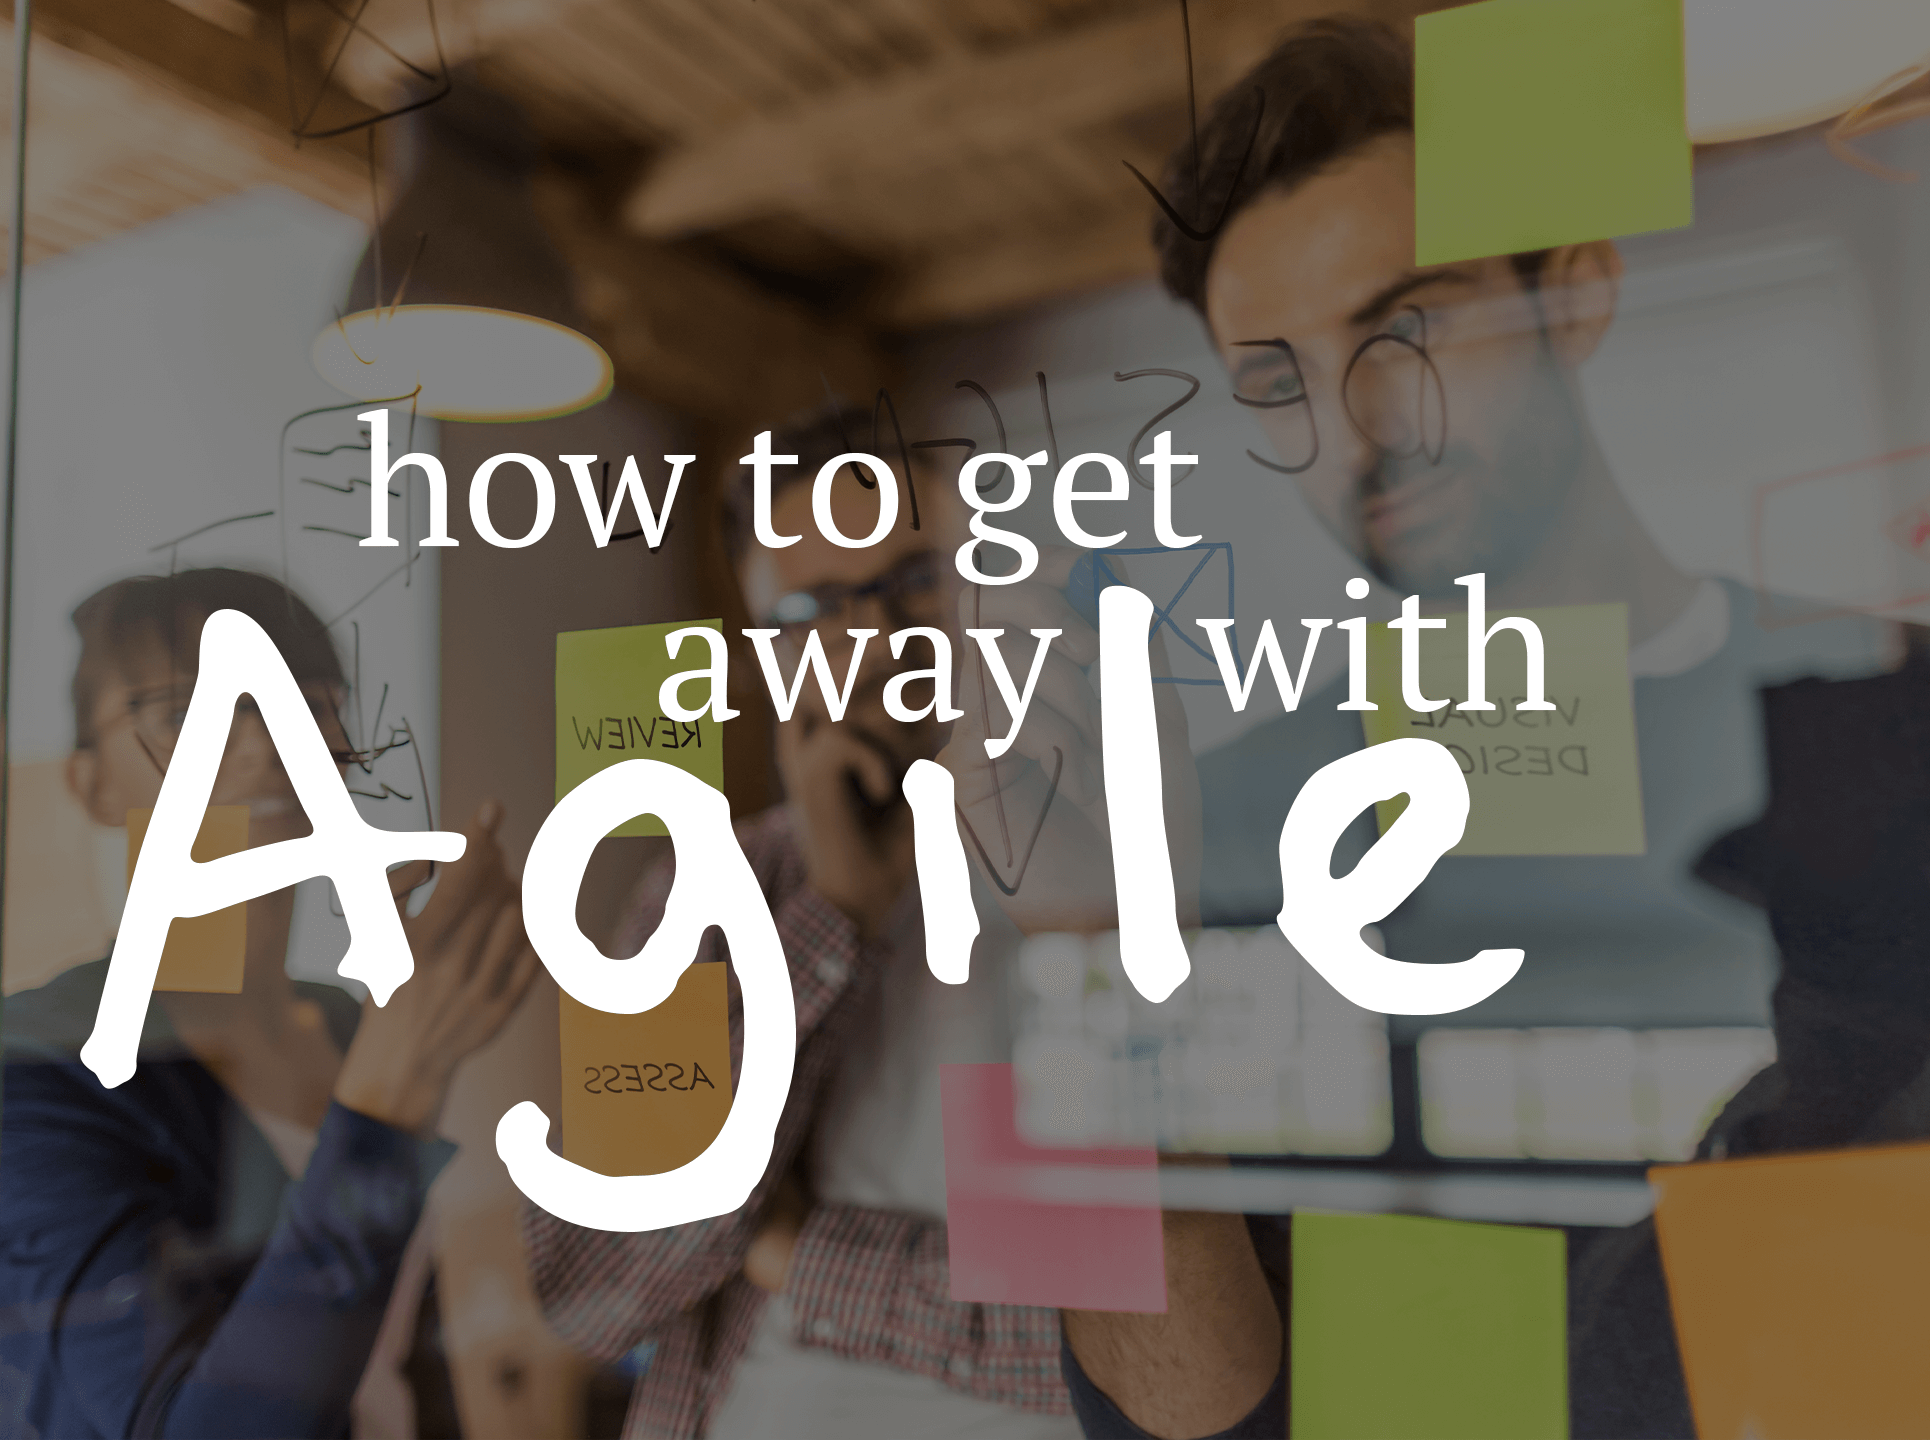 How to get away with Agile